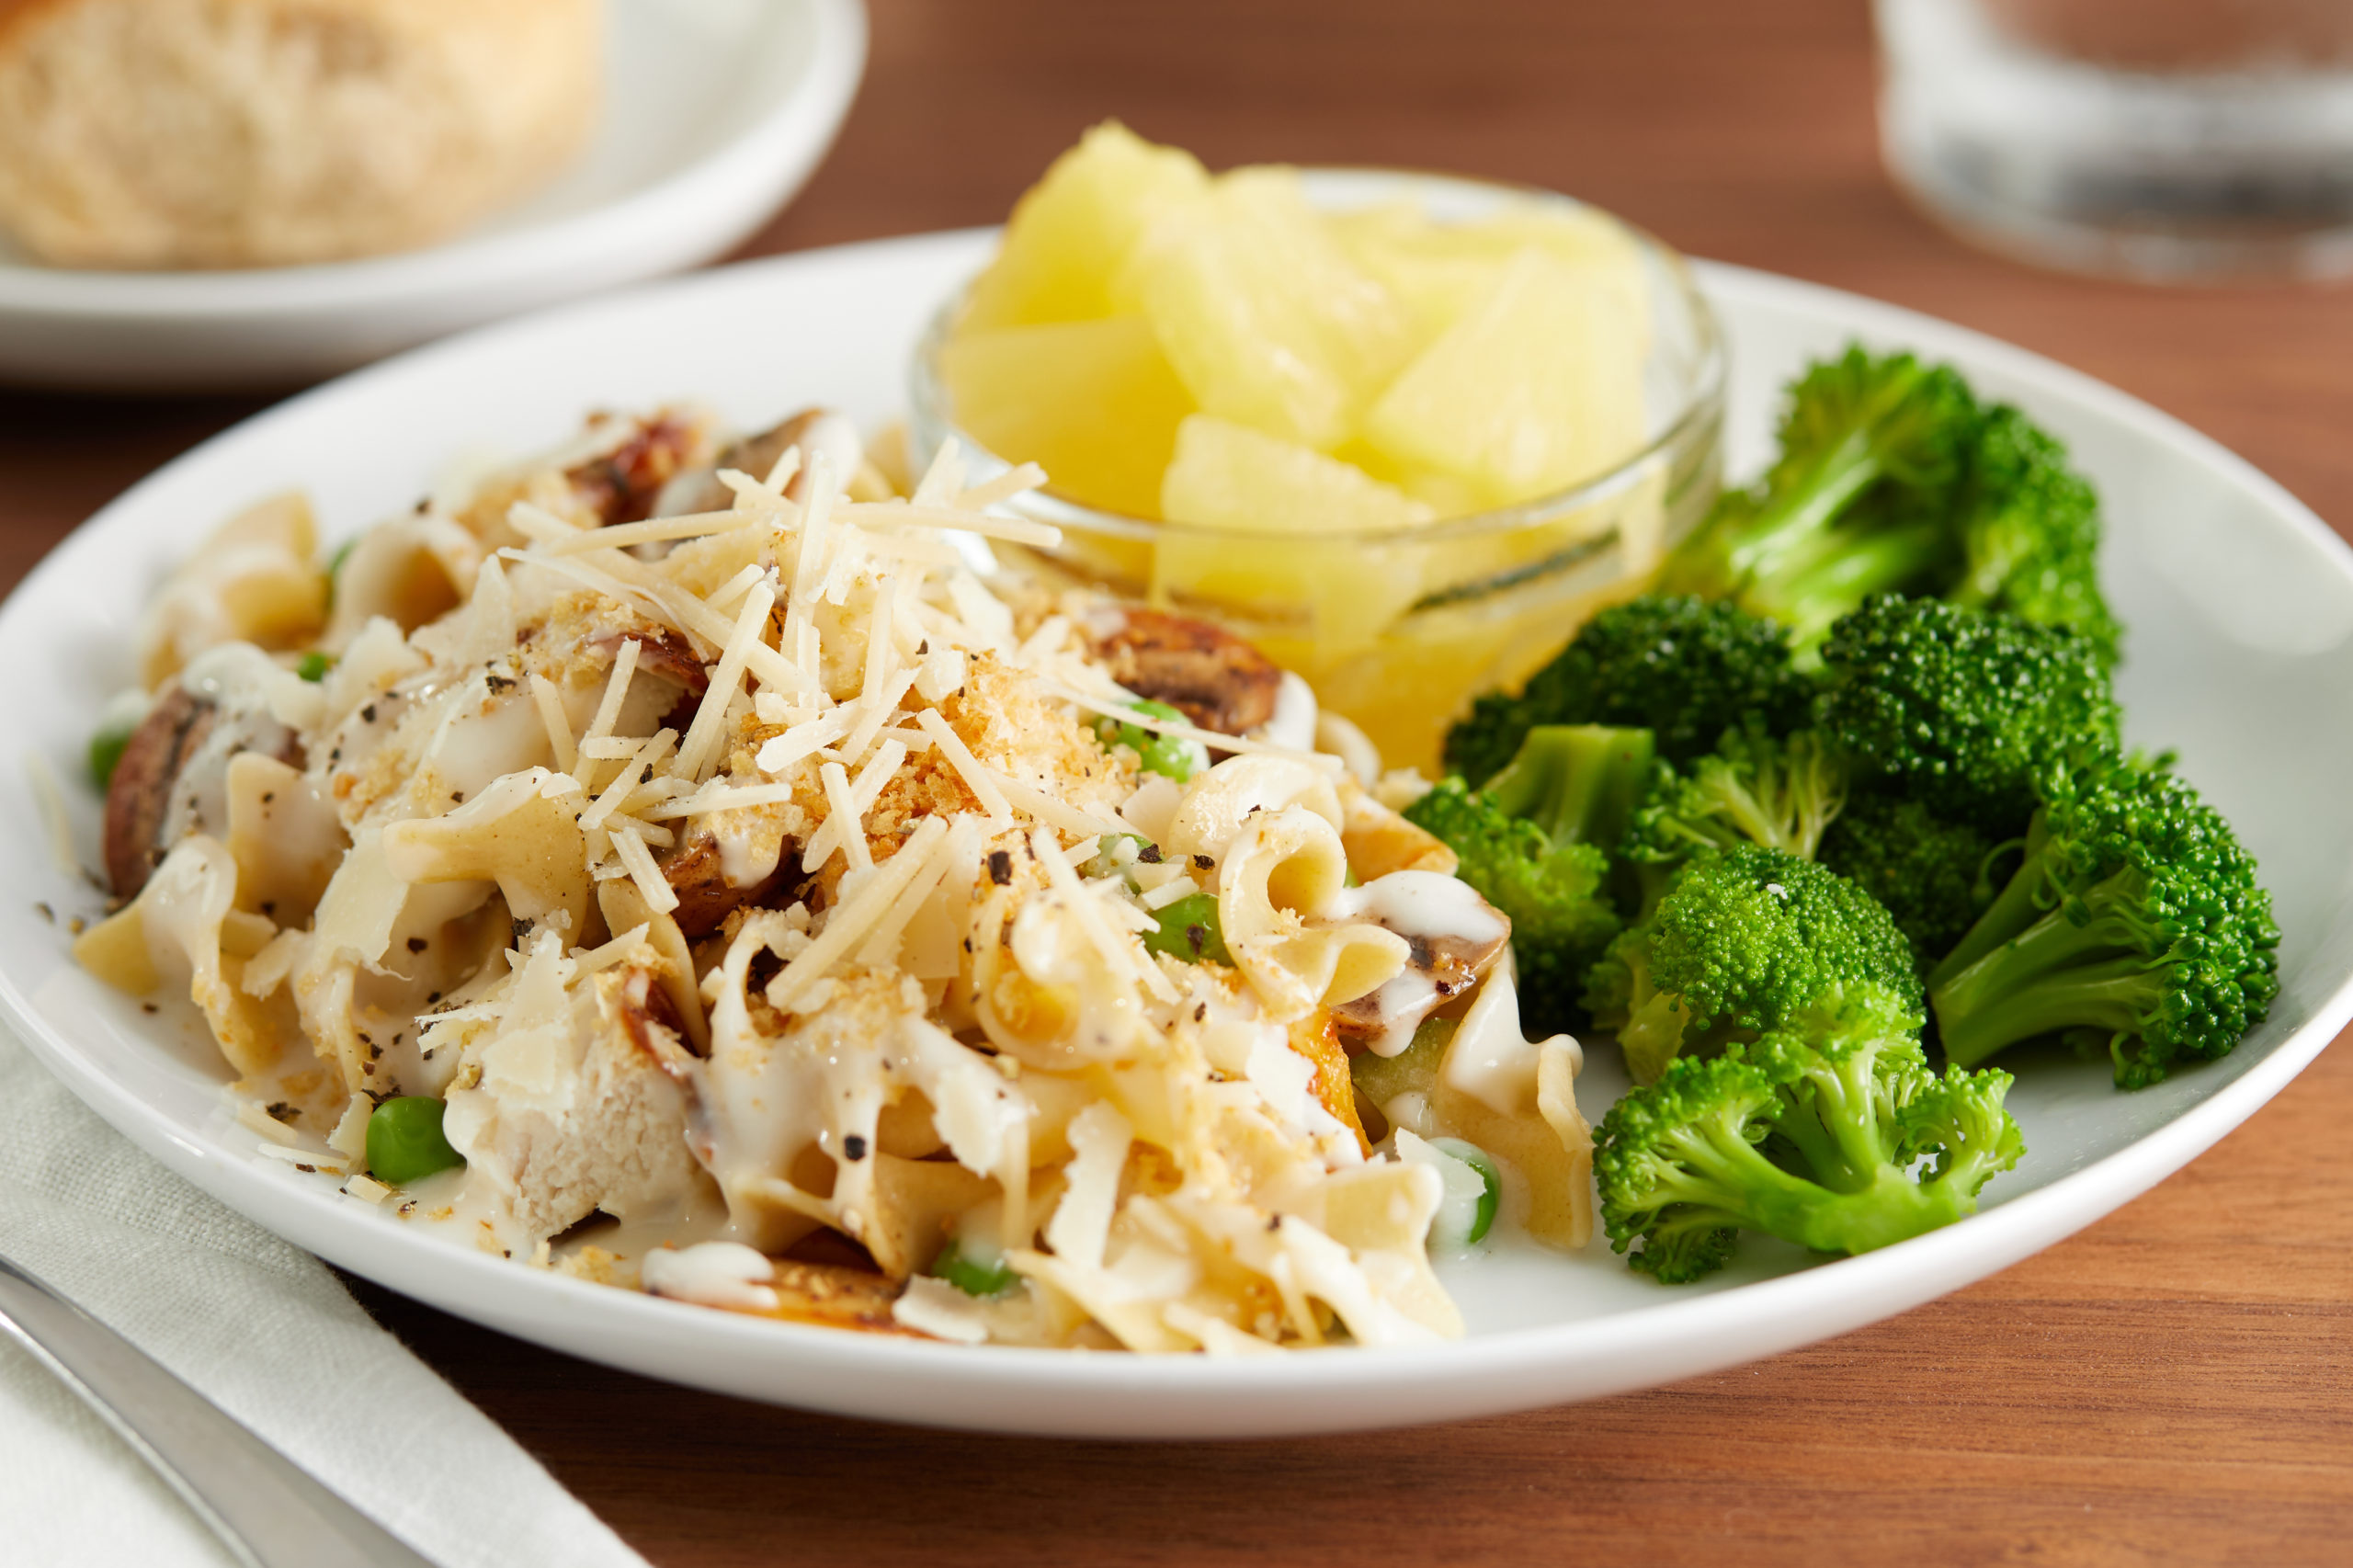 Turkey tetrazzini meal with apples and broccoli